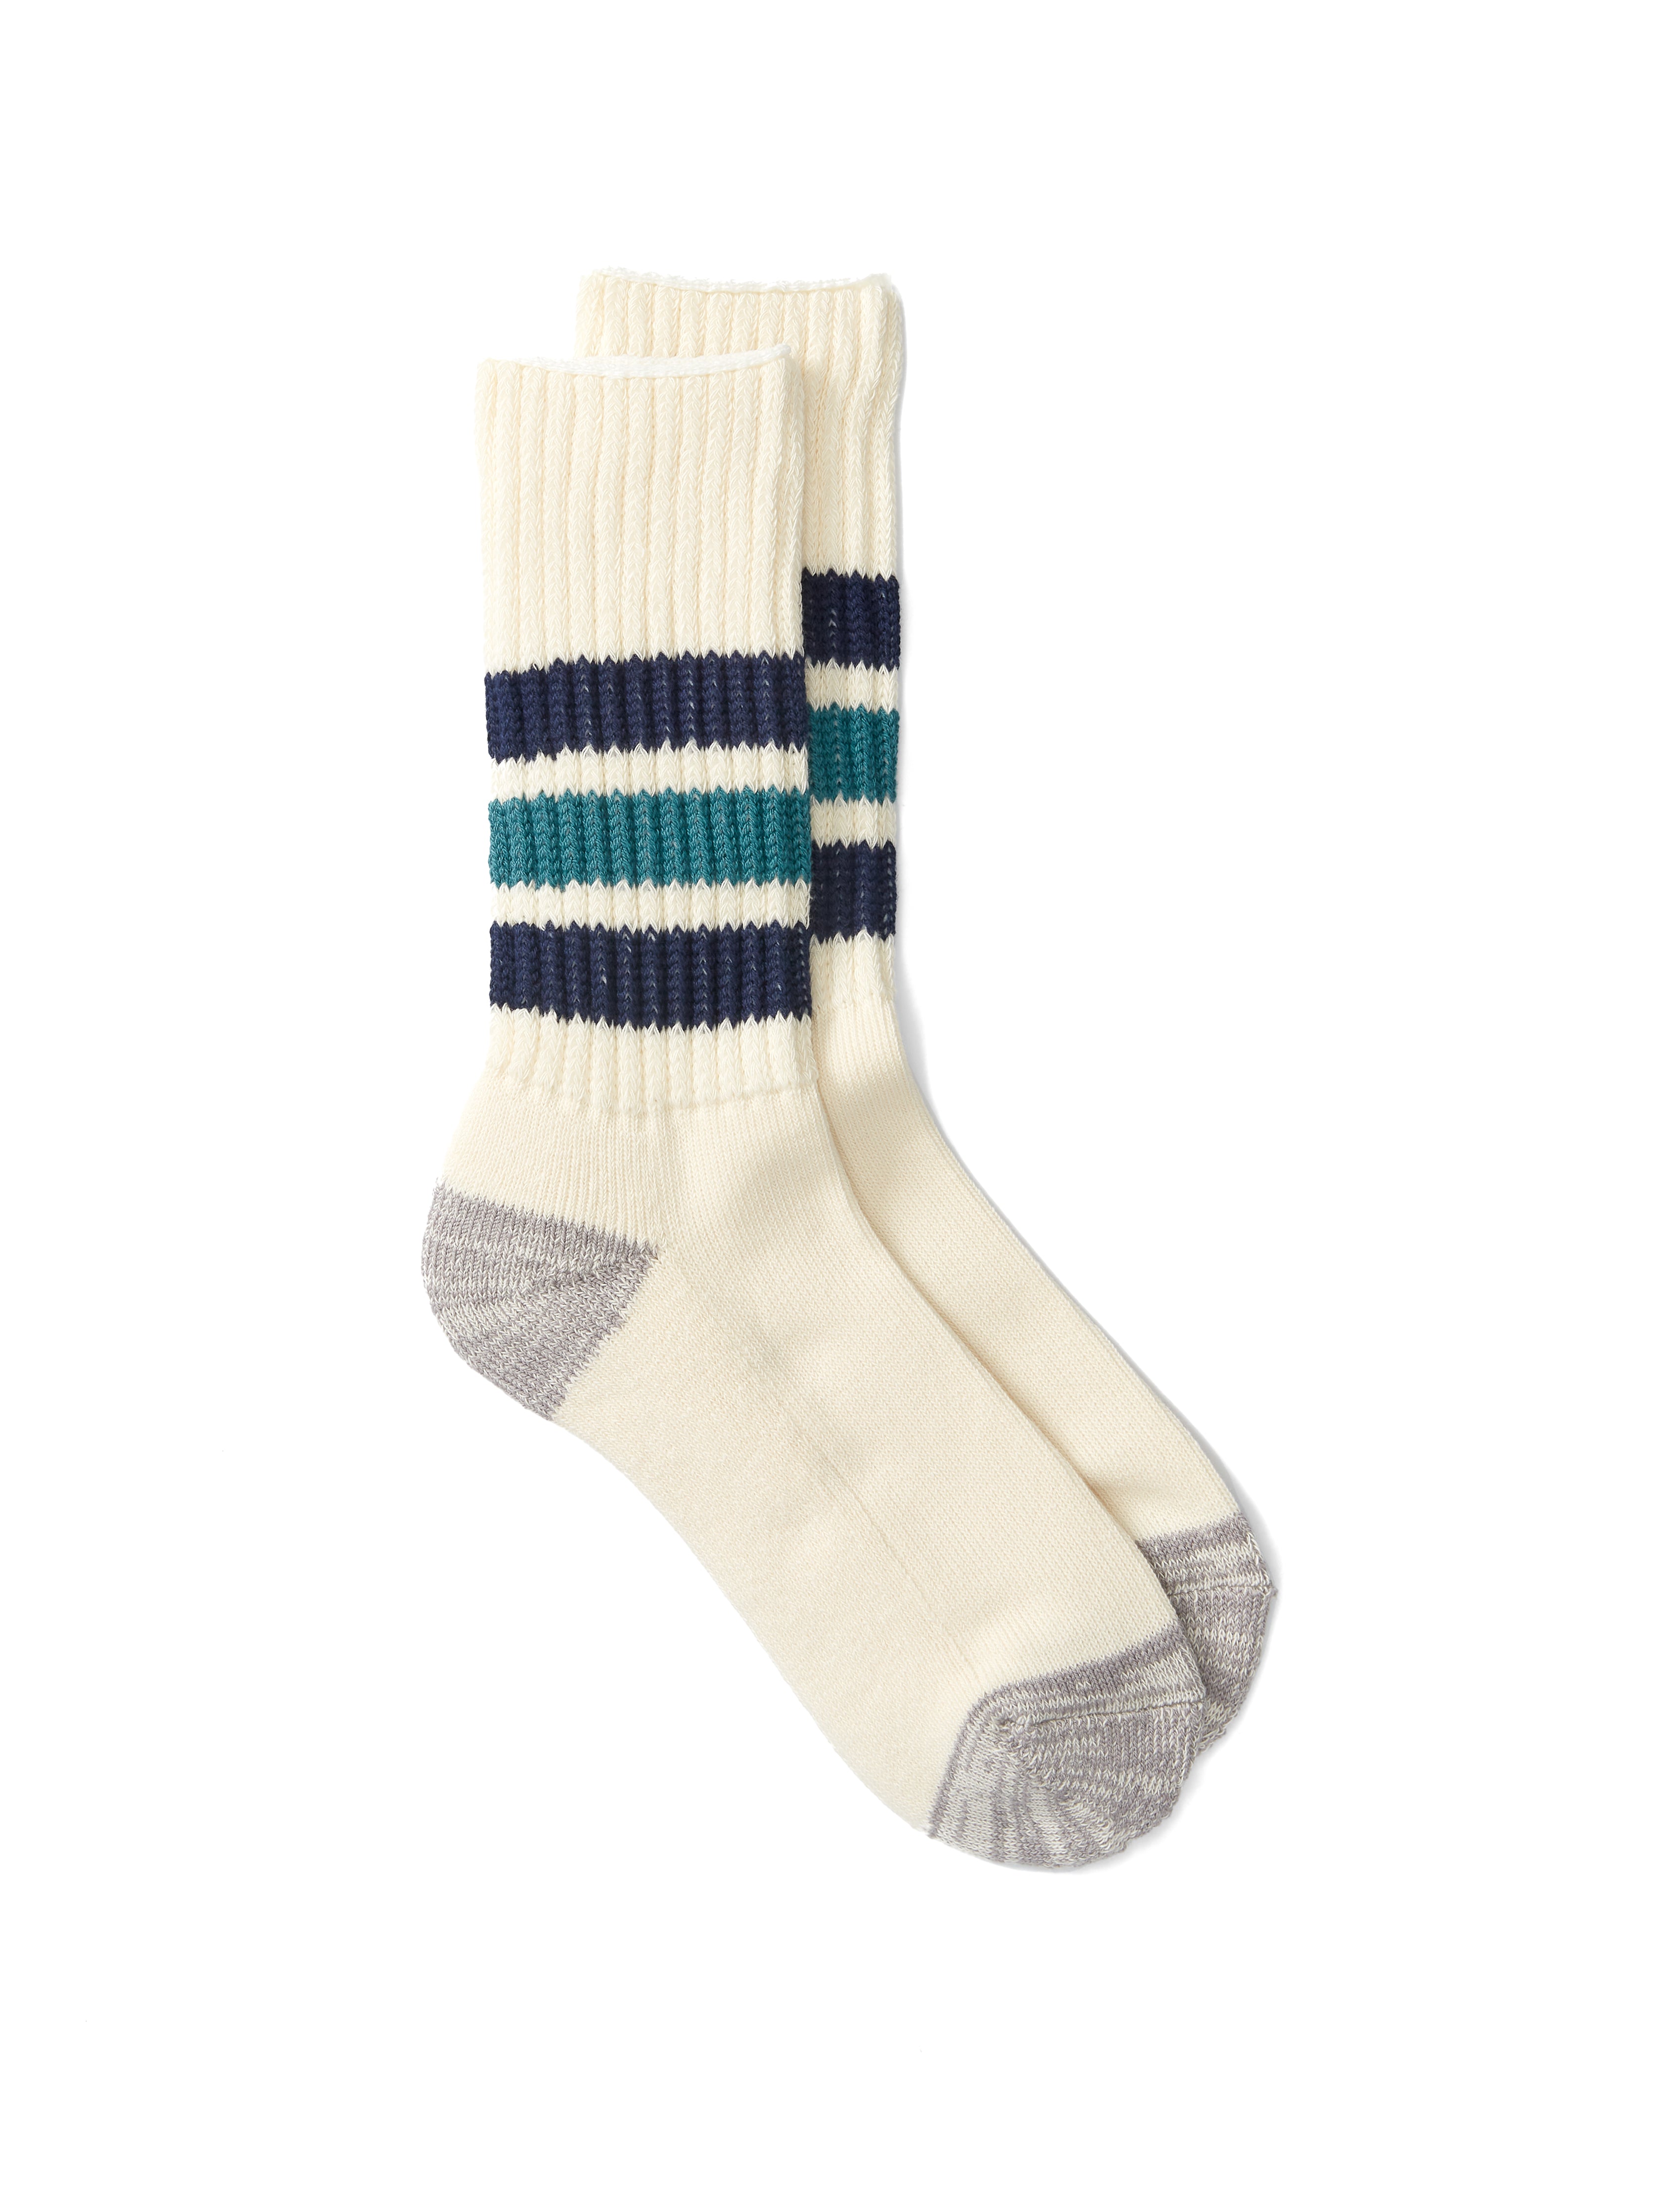 Ro To To Coarse Ribbed Old School Socks Navy/Green